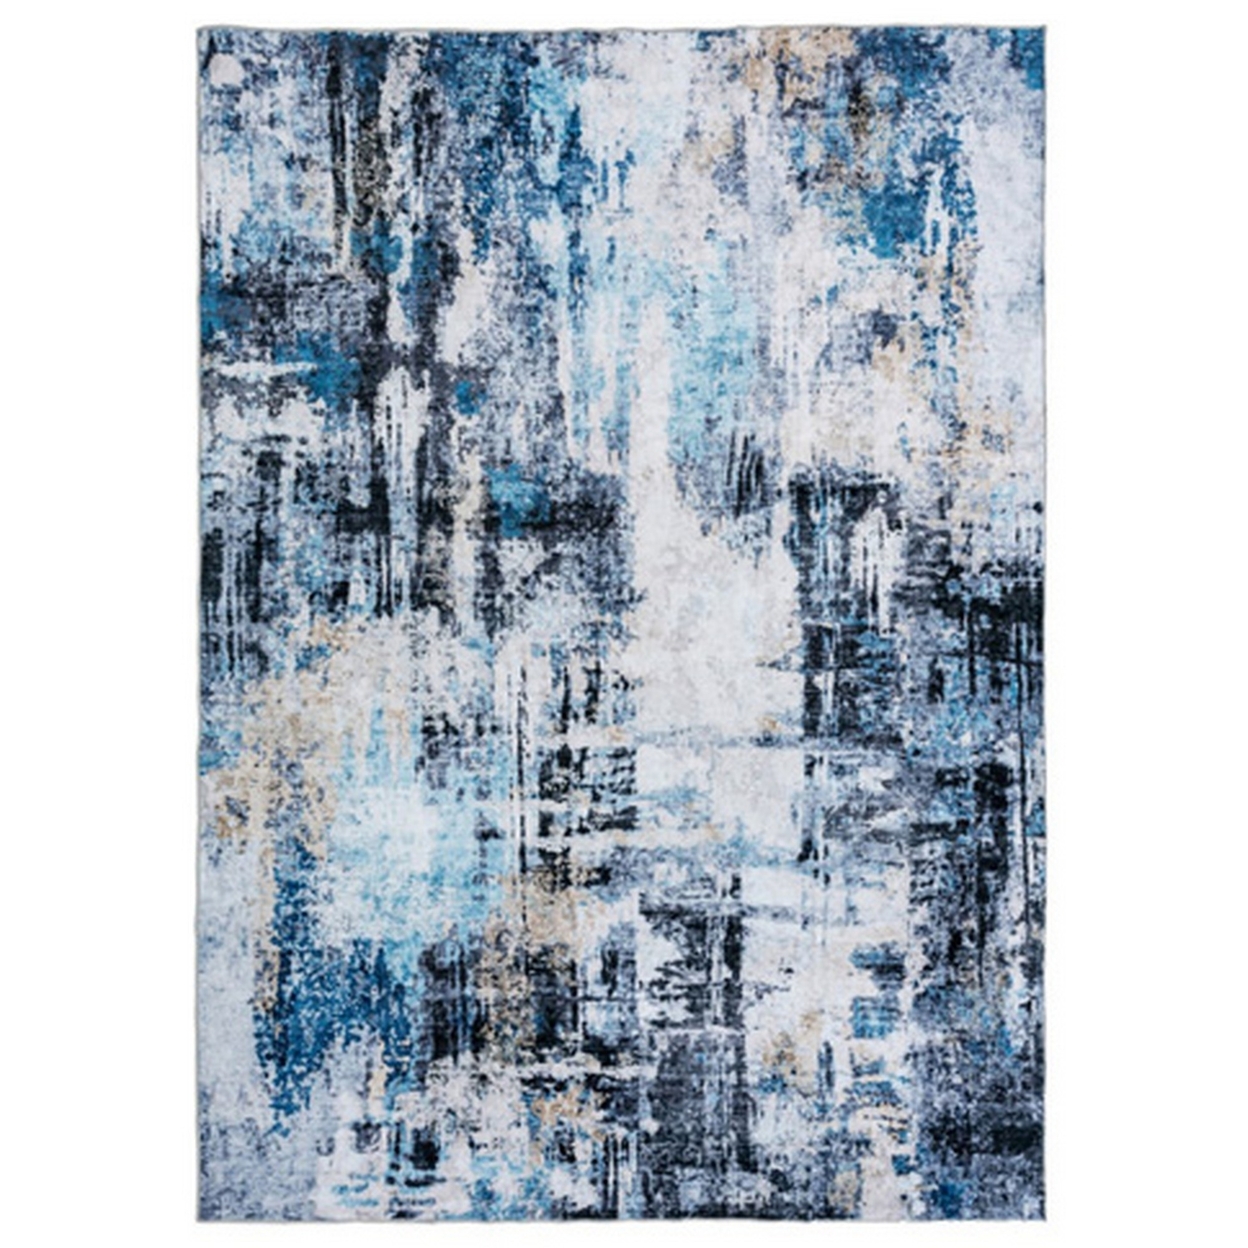 Rue 10 X 8 Large Soft Fabric Floor Area Rug, Washable, Abstract Blue And White Design- Saltoro Sherpi